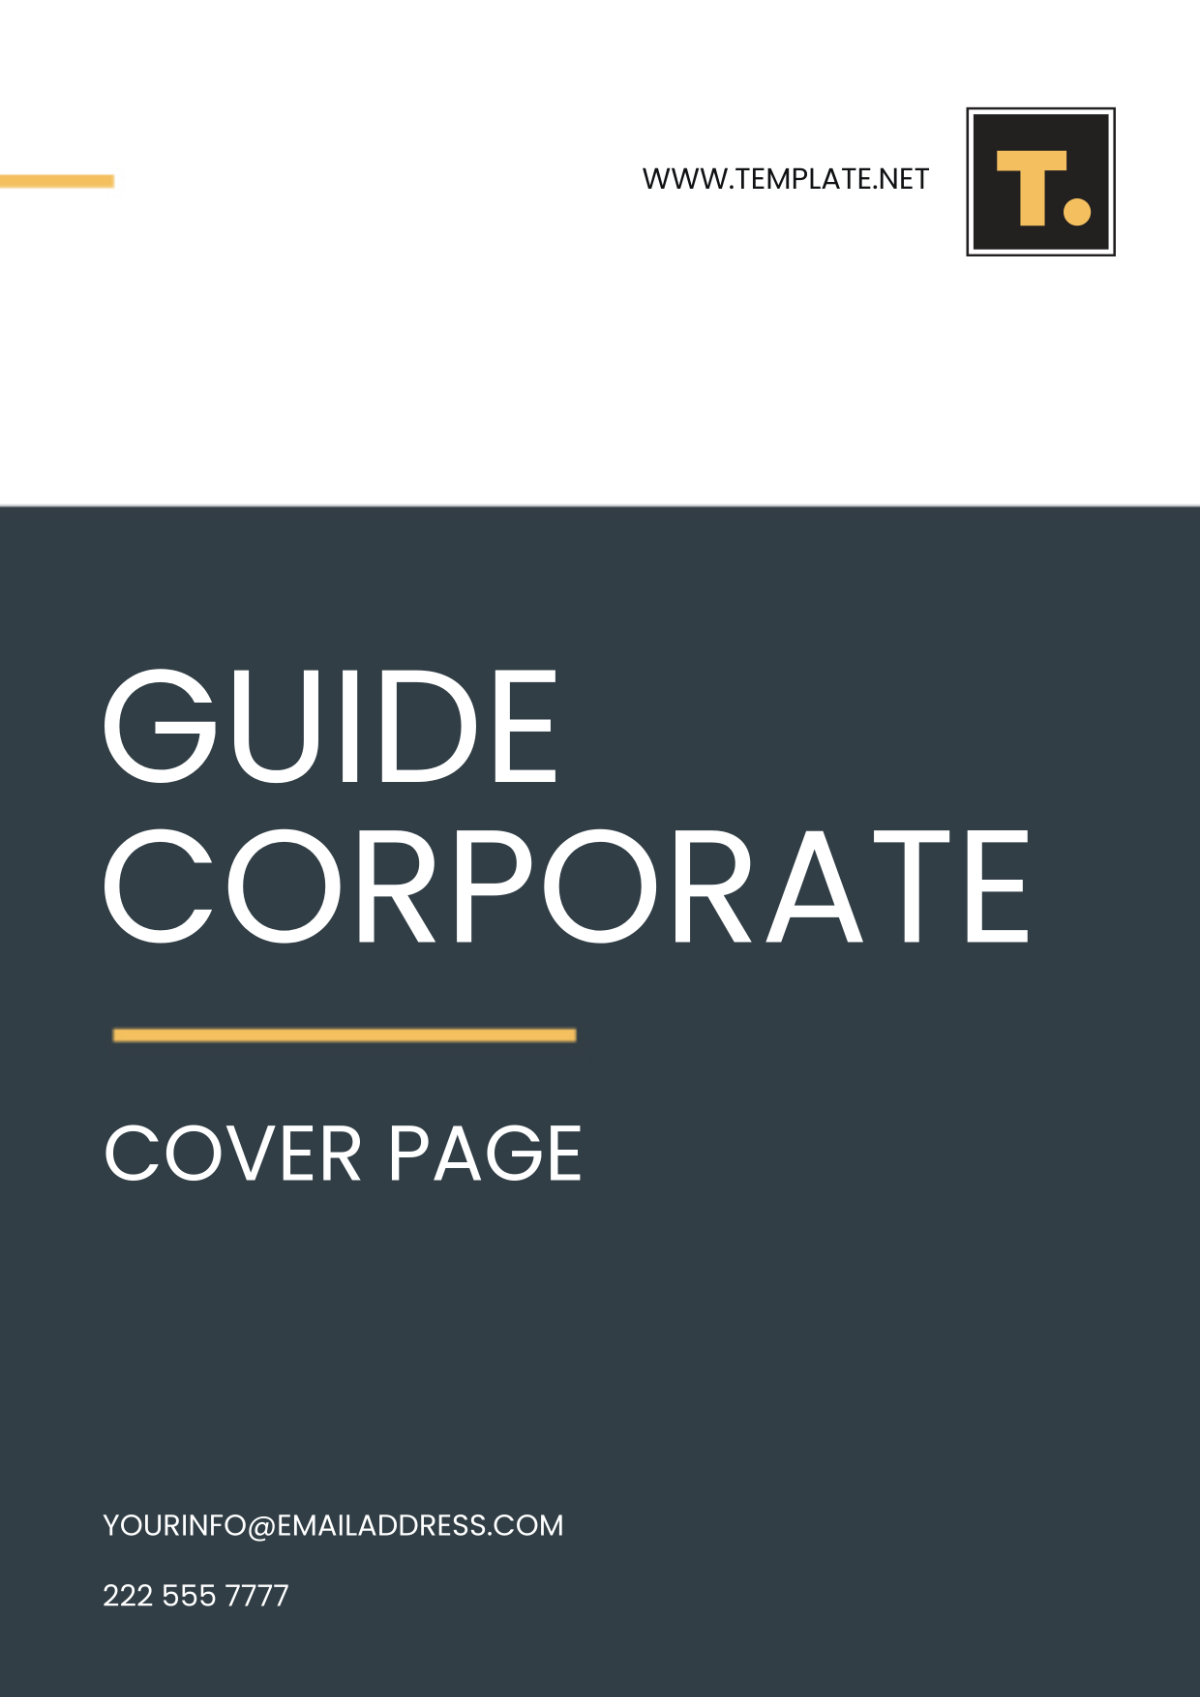 Free Guide Corporate Cover Page Template